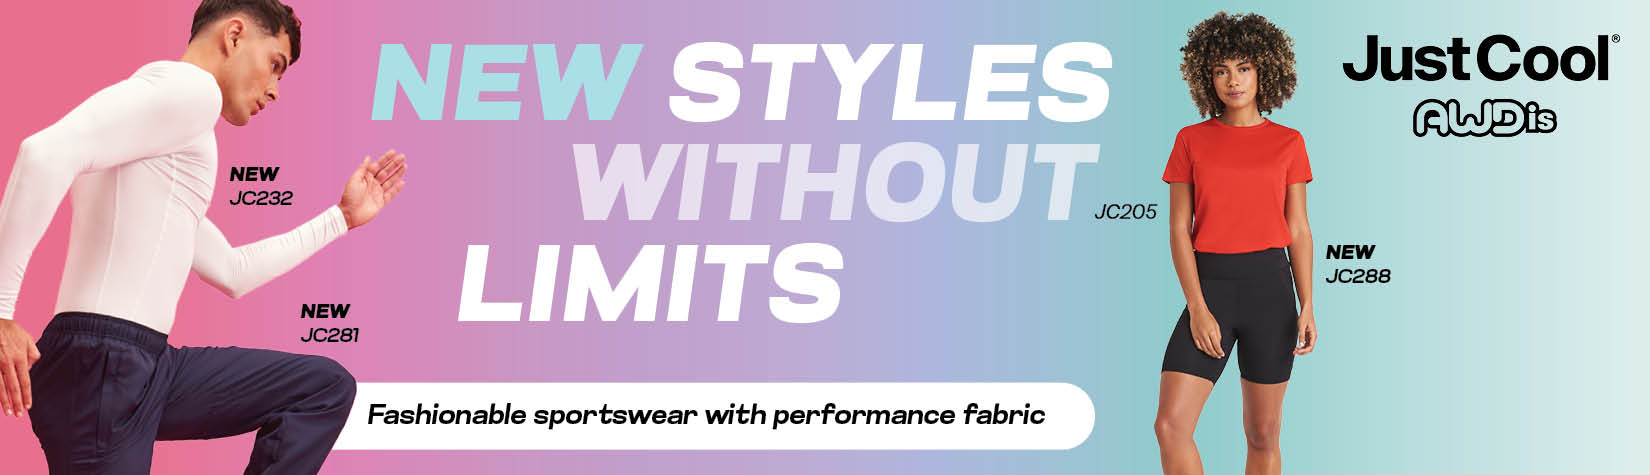 NEW Just Cool styles!